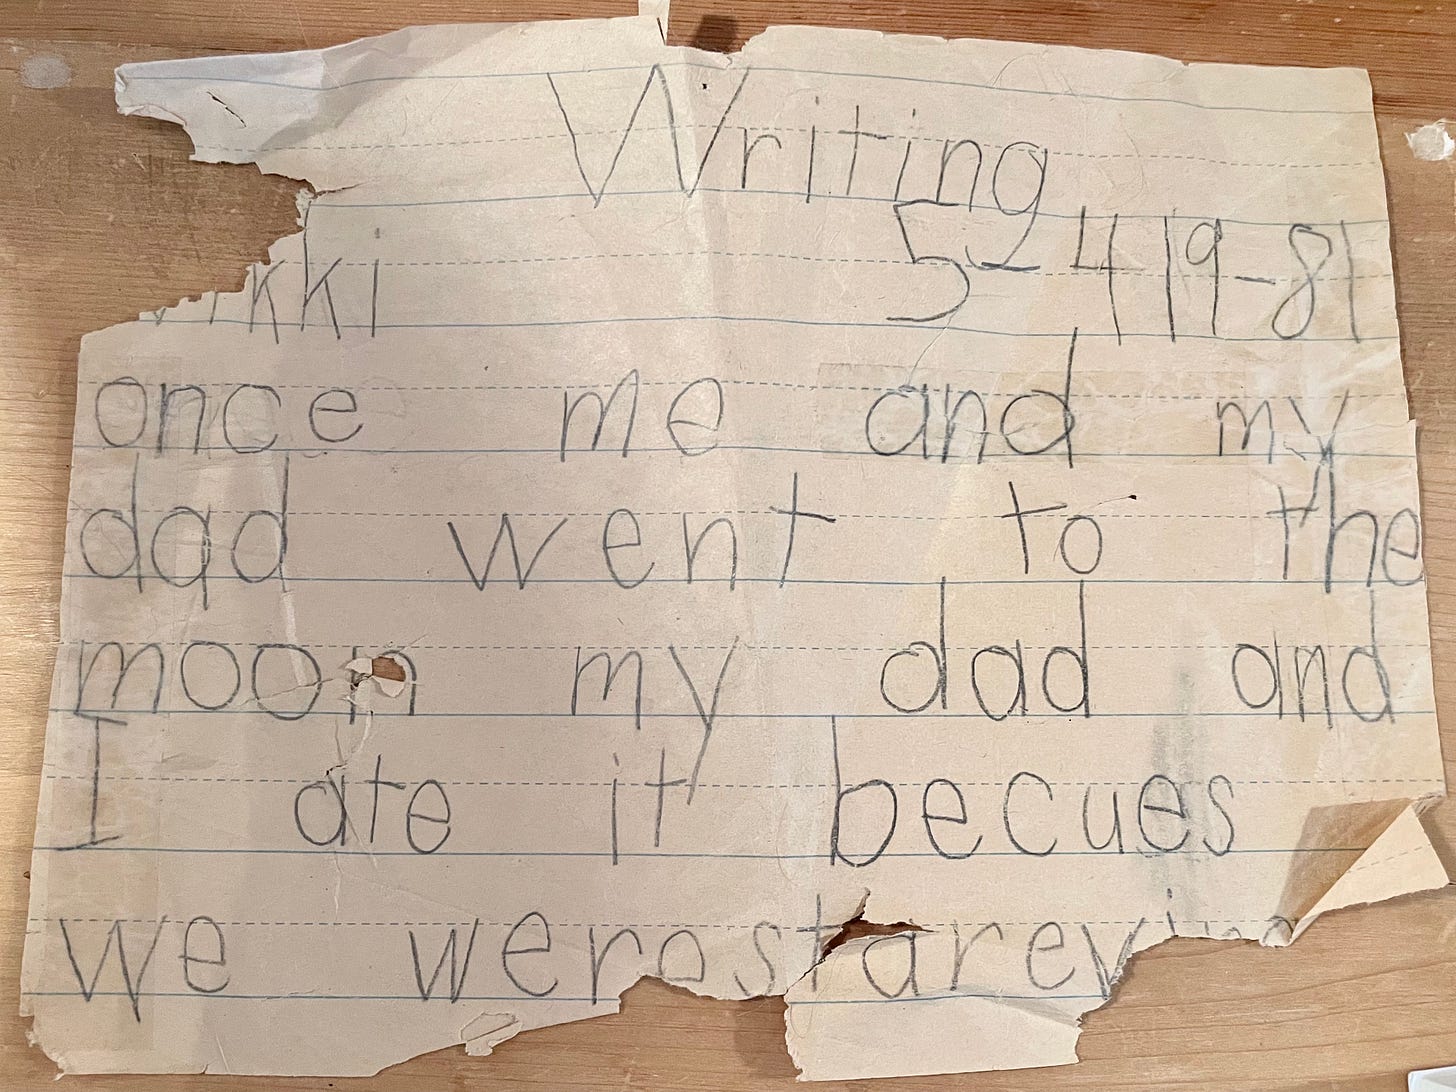 "Writing. Vikki. 5-4 1981. Once me and my dad went to the moon my dad and I ate it becues we were stareving..."